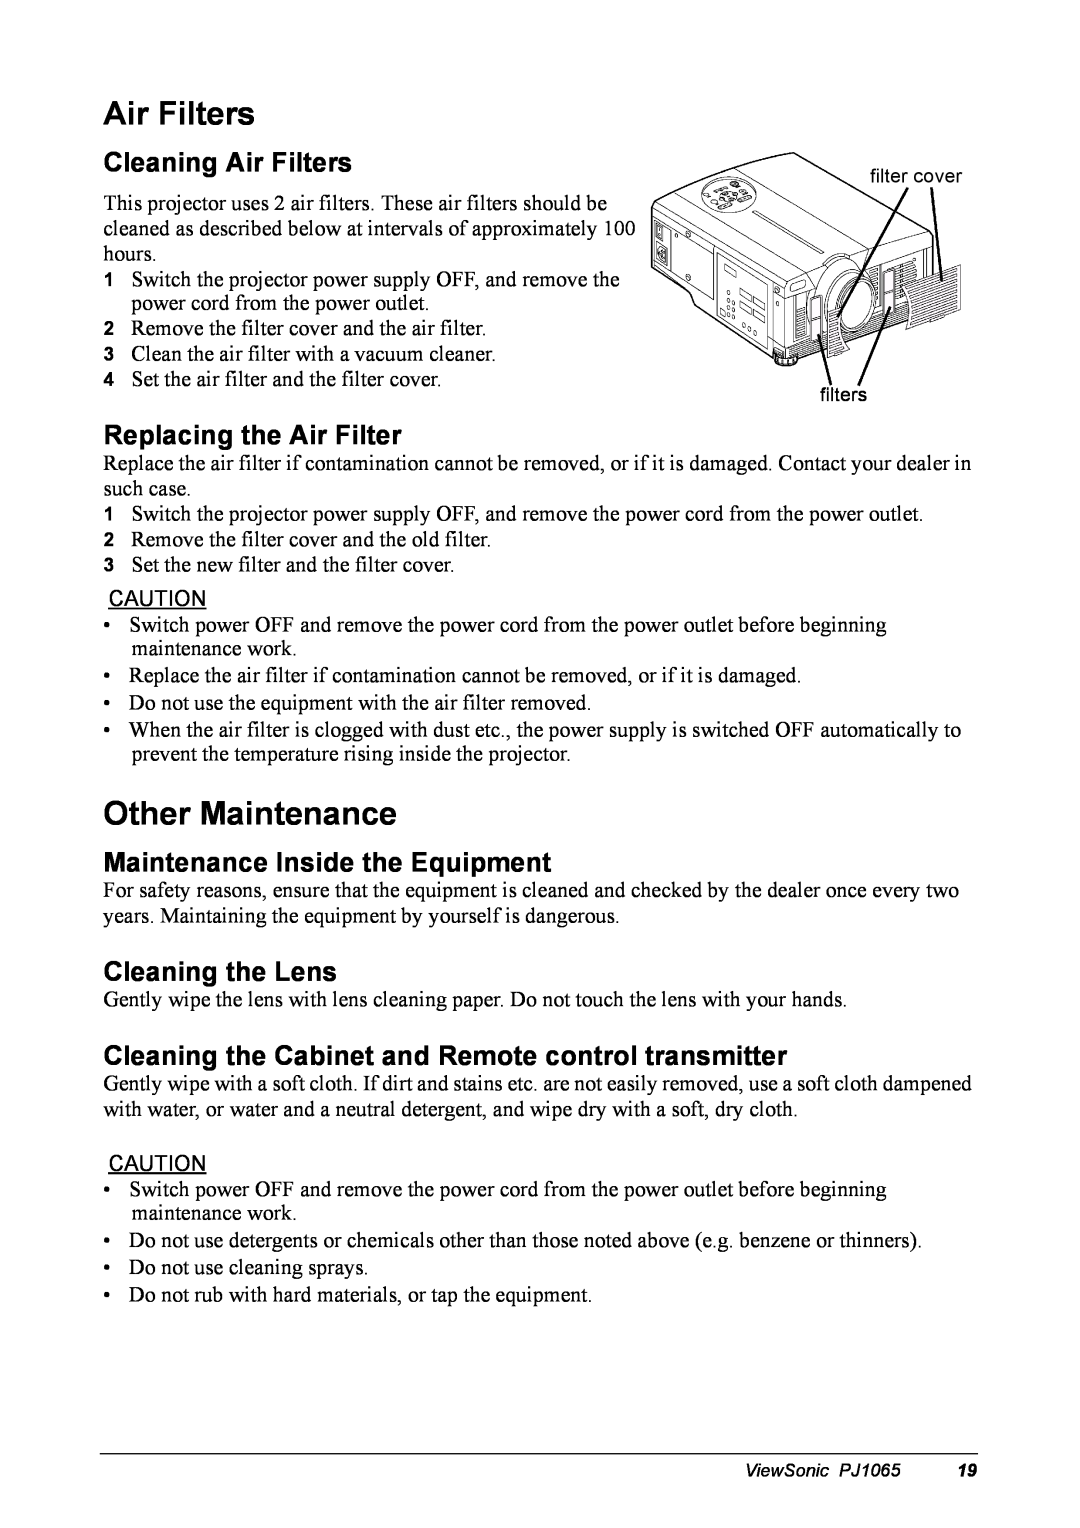 ViewSonic PJ1065 Other Maintenance, Cleaning Air Filters, Replacing the Air Filter, Maintenance Inside the Equipment 